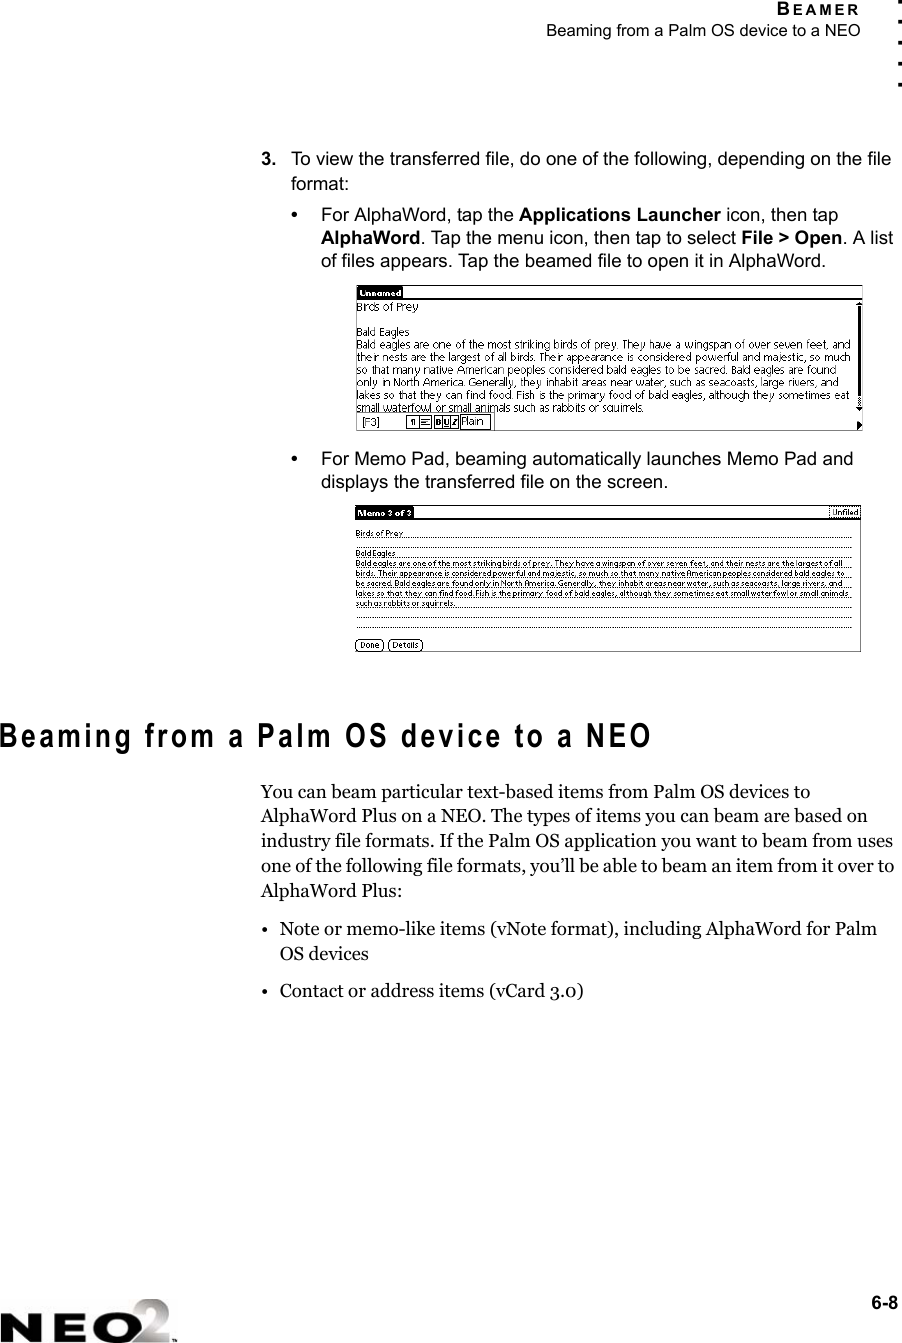 BEAMERBeaming from a Palm OS device to a NEO6-8. . . . .3. To view the transferred file, do one of the following, depending on the file format:•For AlphaWord, tap the Applications Launcher icon, then tap AlphaWord. Tap the menu icon, then tap to select File &gt; Open. A list of files appears. Tap the beamed file to open it in AlphaWord.•For Memo Pad, beaming automatically launches Memo Pad and displays the transferred file on the screen.Beaming from a Palm OS device to a NEOYou can beam particular text-based items from Palm OS devices to AlphaWord Plus on a NEO. The types of items you can beam are based on industry file formats. If the Palm OS application you want to beam from uses one of the following file formats, you’ll be able to beam an item from it over to AlphaWord Plus:• Note or memo-like items (vNote format), including AlphaWord for Palm OS devices• Contact or address items (vCard 3.0)